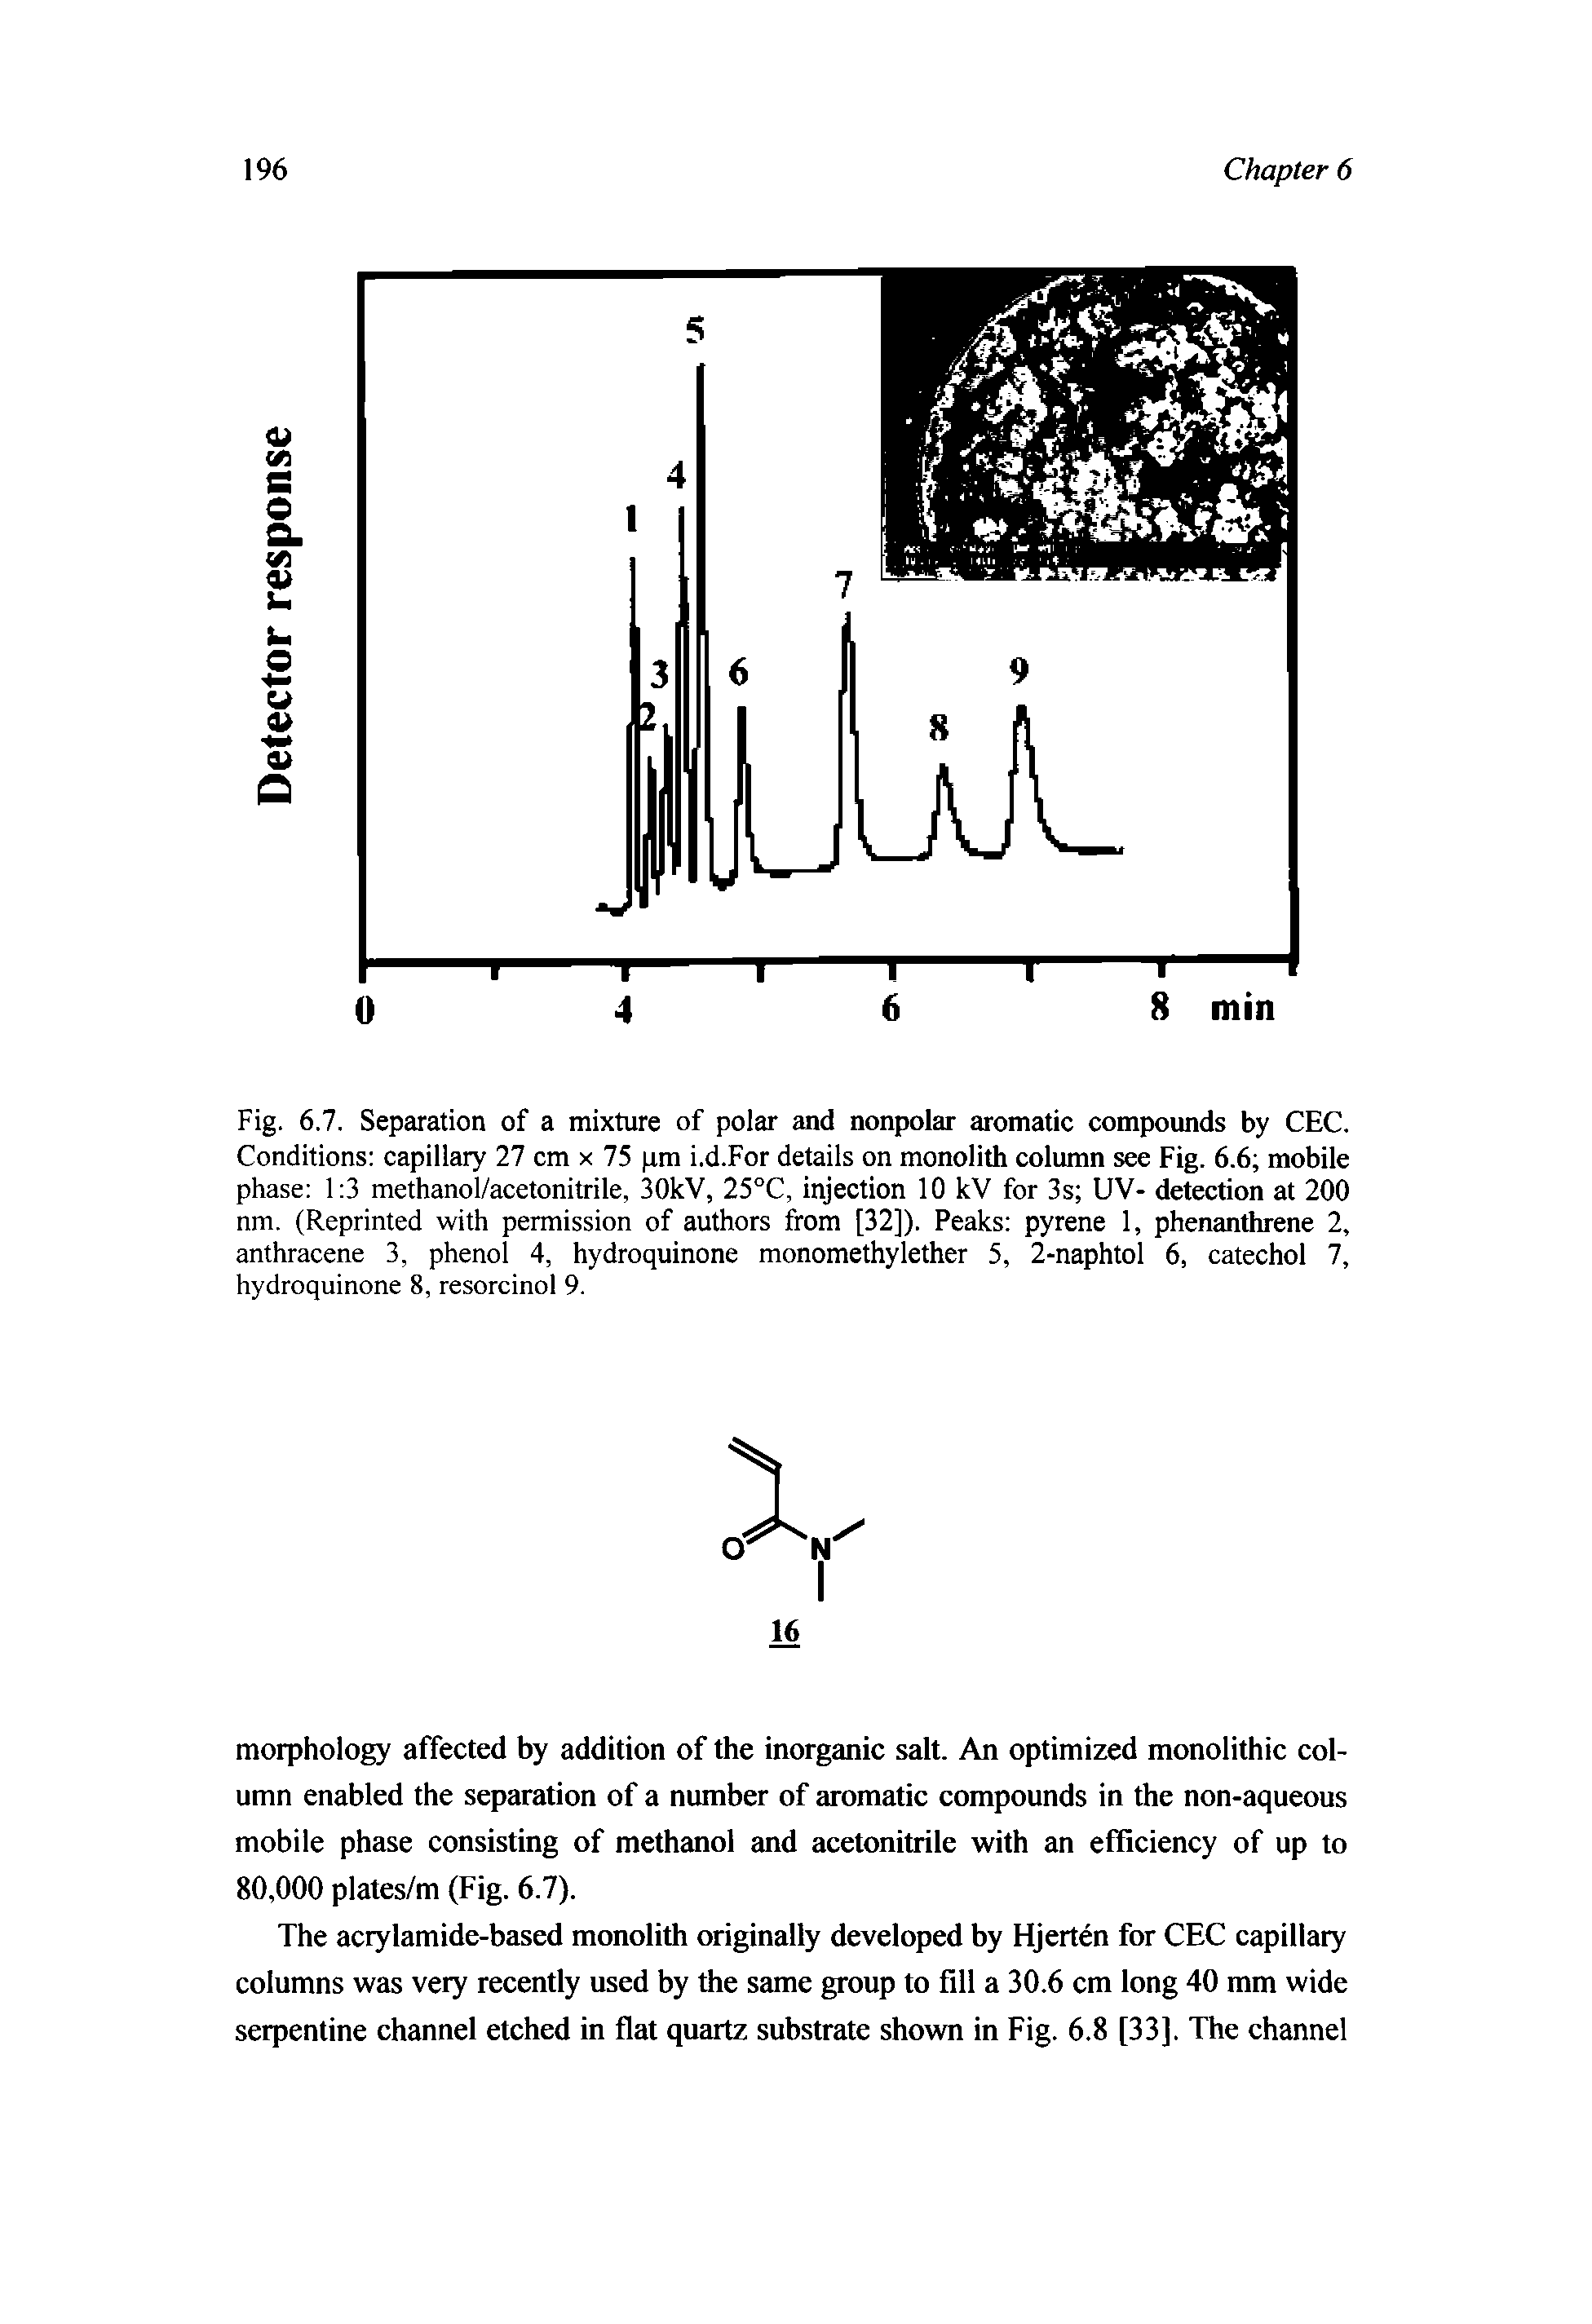 Fig. 6.7. Separation of a mixture of polar and nonpolar aromatic compounds by CEC. Conditions capillary 27 cm x 75 pm i.d.For details on monolith column see Fig. 6.6 mobile phase 1 3 methanol/acetonitrile, 30kV, 25°C, injection 10 kV for 3s UV- detection at 200 nm. (Reprinted with permission of authors from [32]). Peaks pyrene 1, phenanthrene 2, anthracene 3, phenol 4, hydroquinone monomethylether 5, 2-naphtol 6, catechol 7, hydroquinone 8, resorcinol 9.